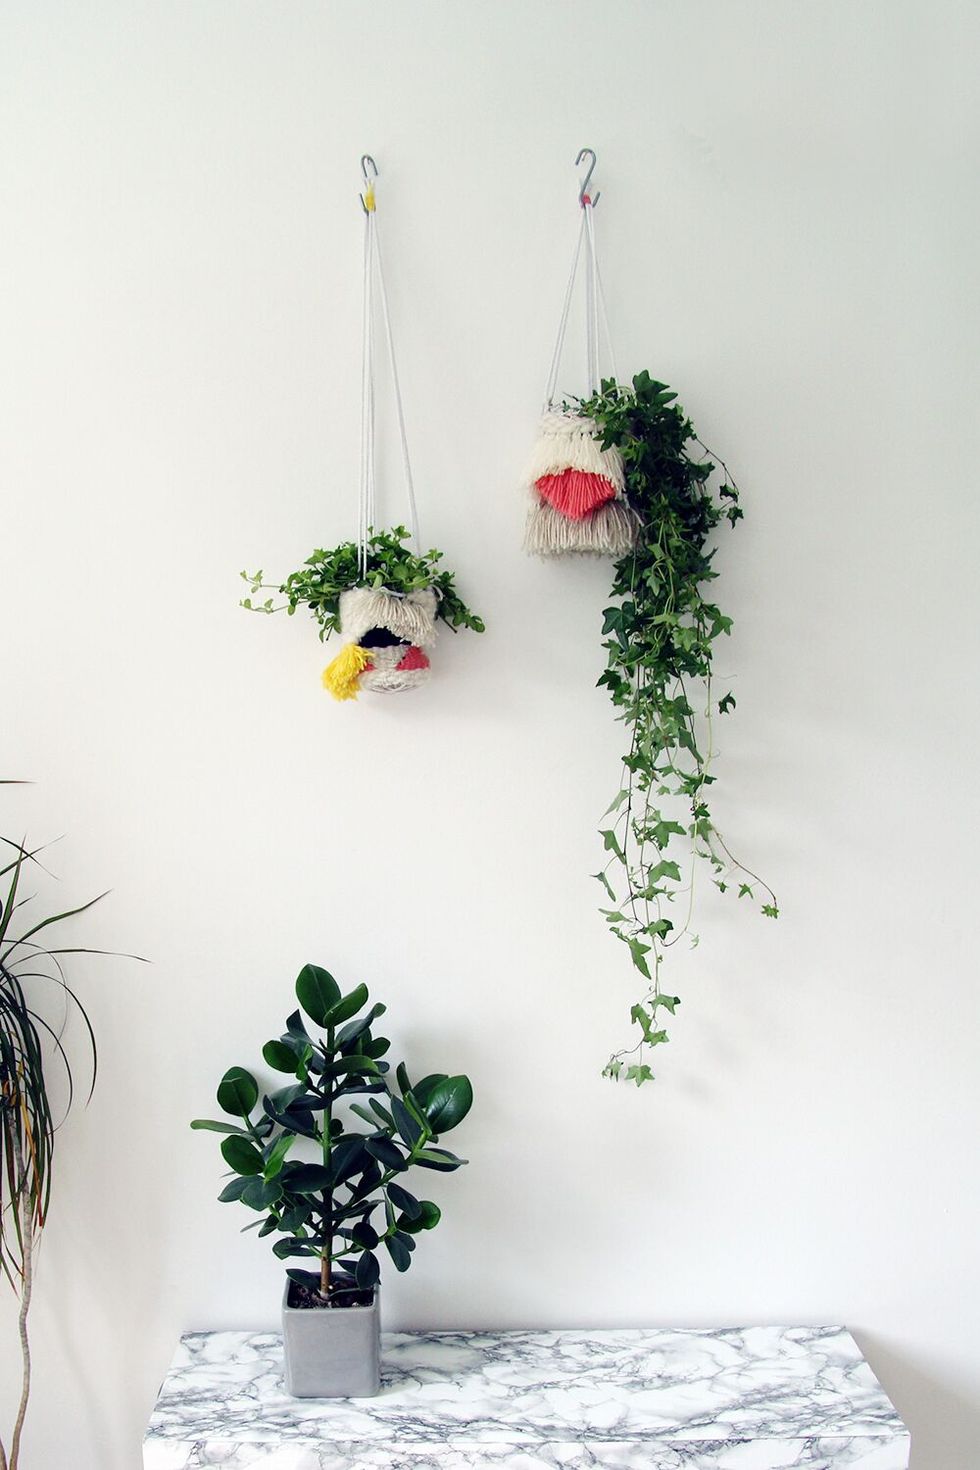 20 DIY Hanging Planters - How to Make a Hanging Planter